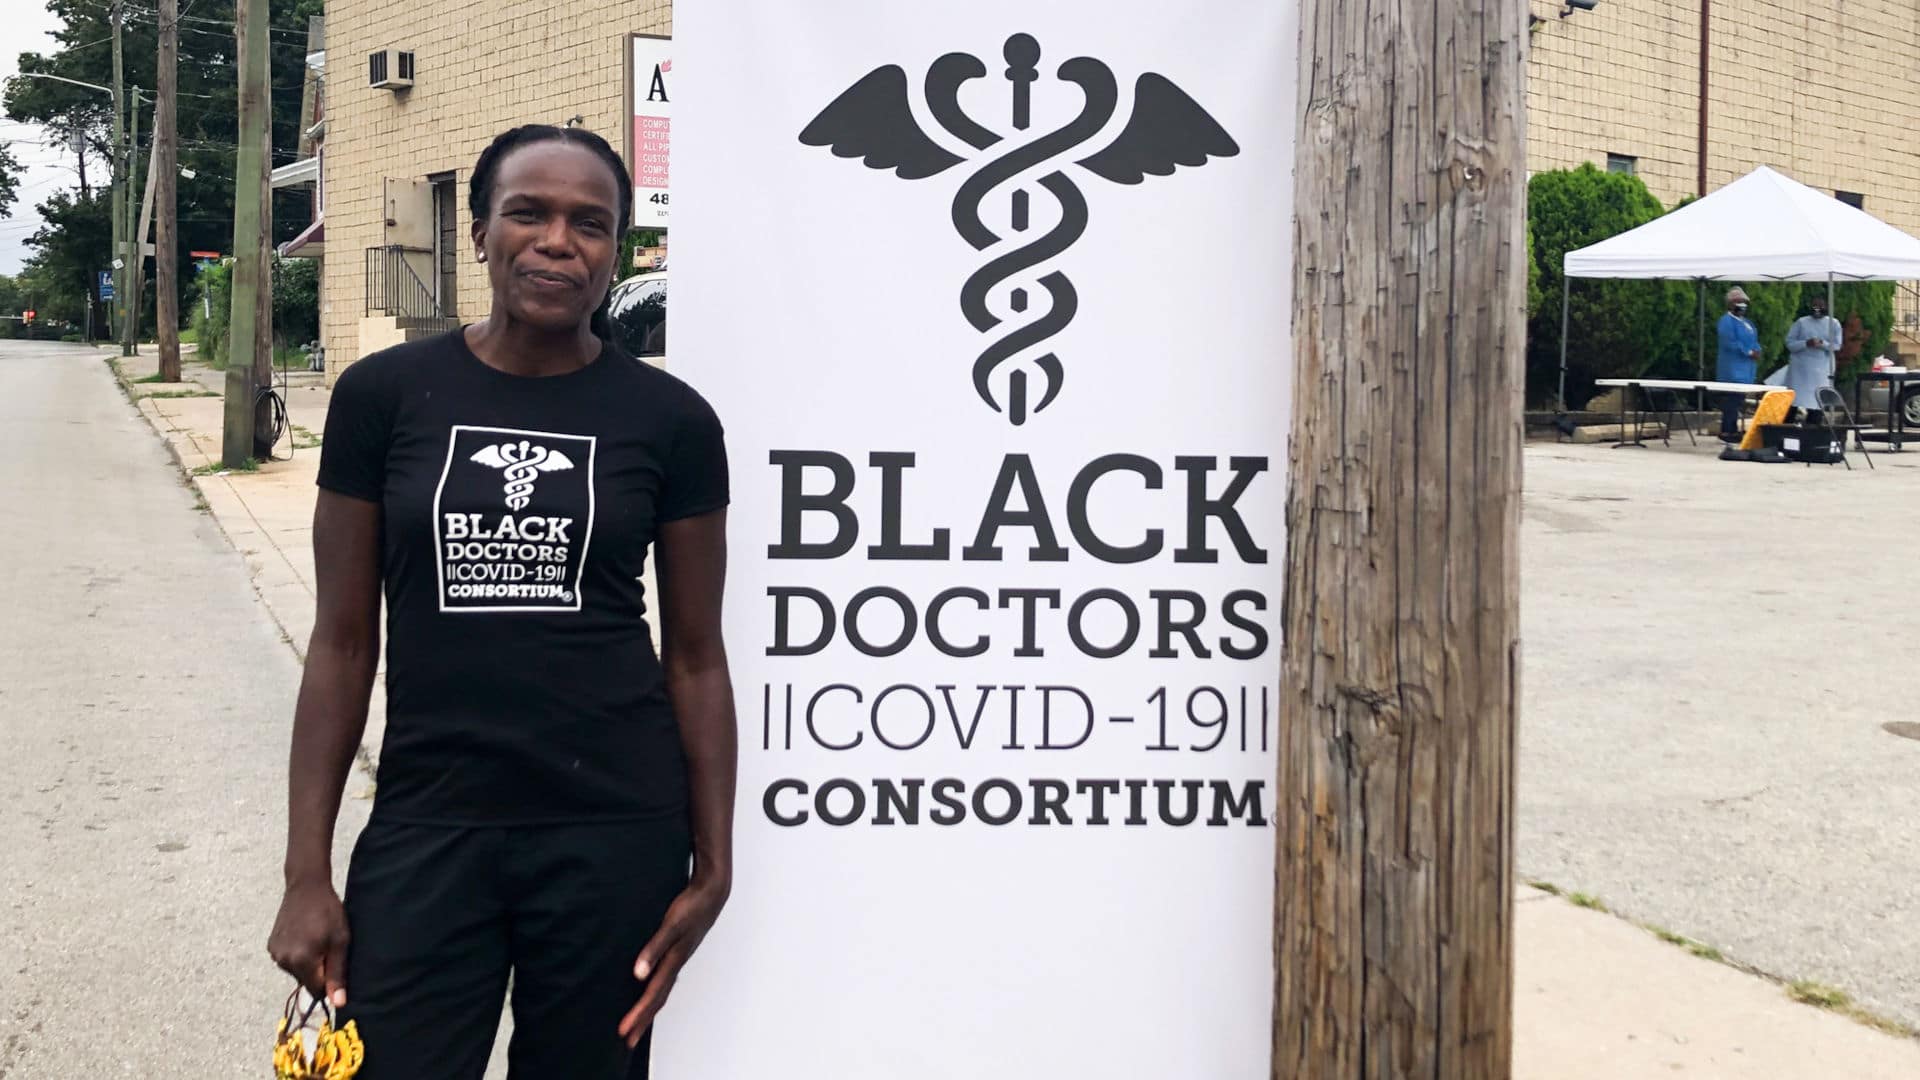 Dr. Ala Stanford visits a Black Doctors
Consortium testing site in
Darby, Pennsylvania, on September 9, 2020.